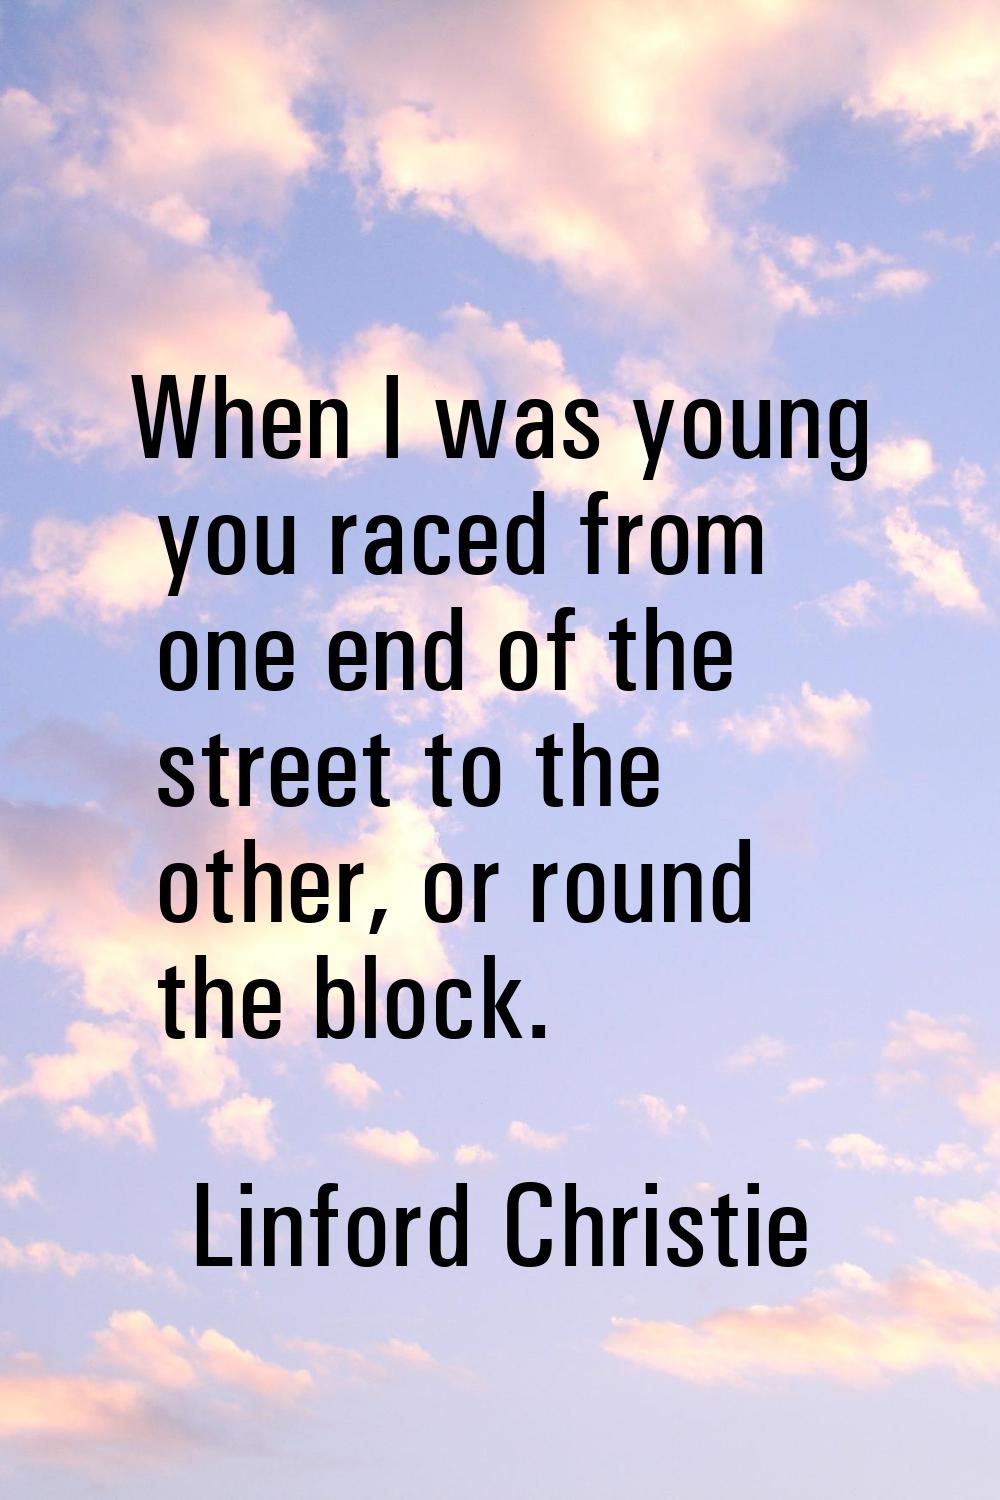 When I was young you raced from one end of the street to the other, or round the block.